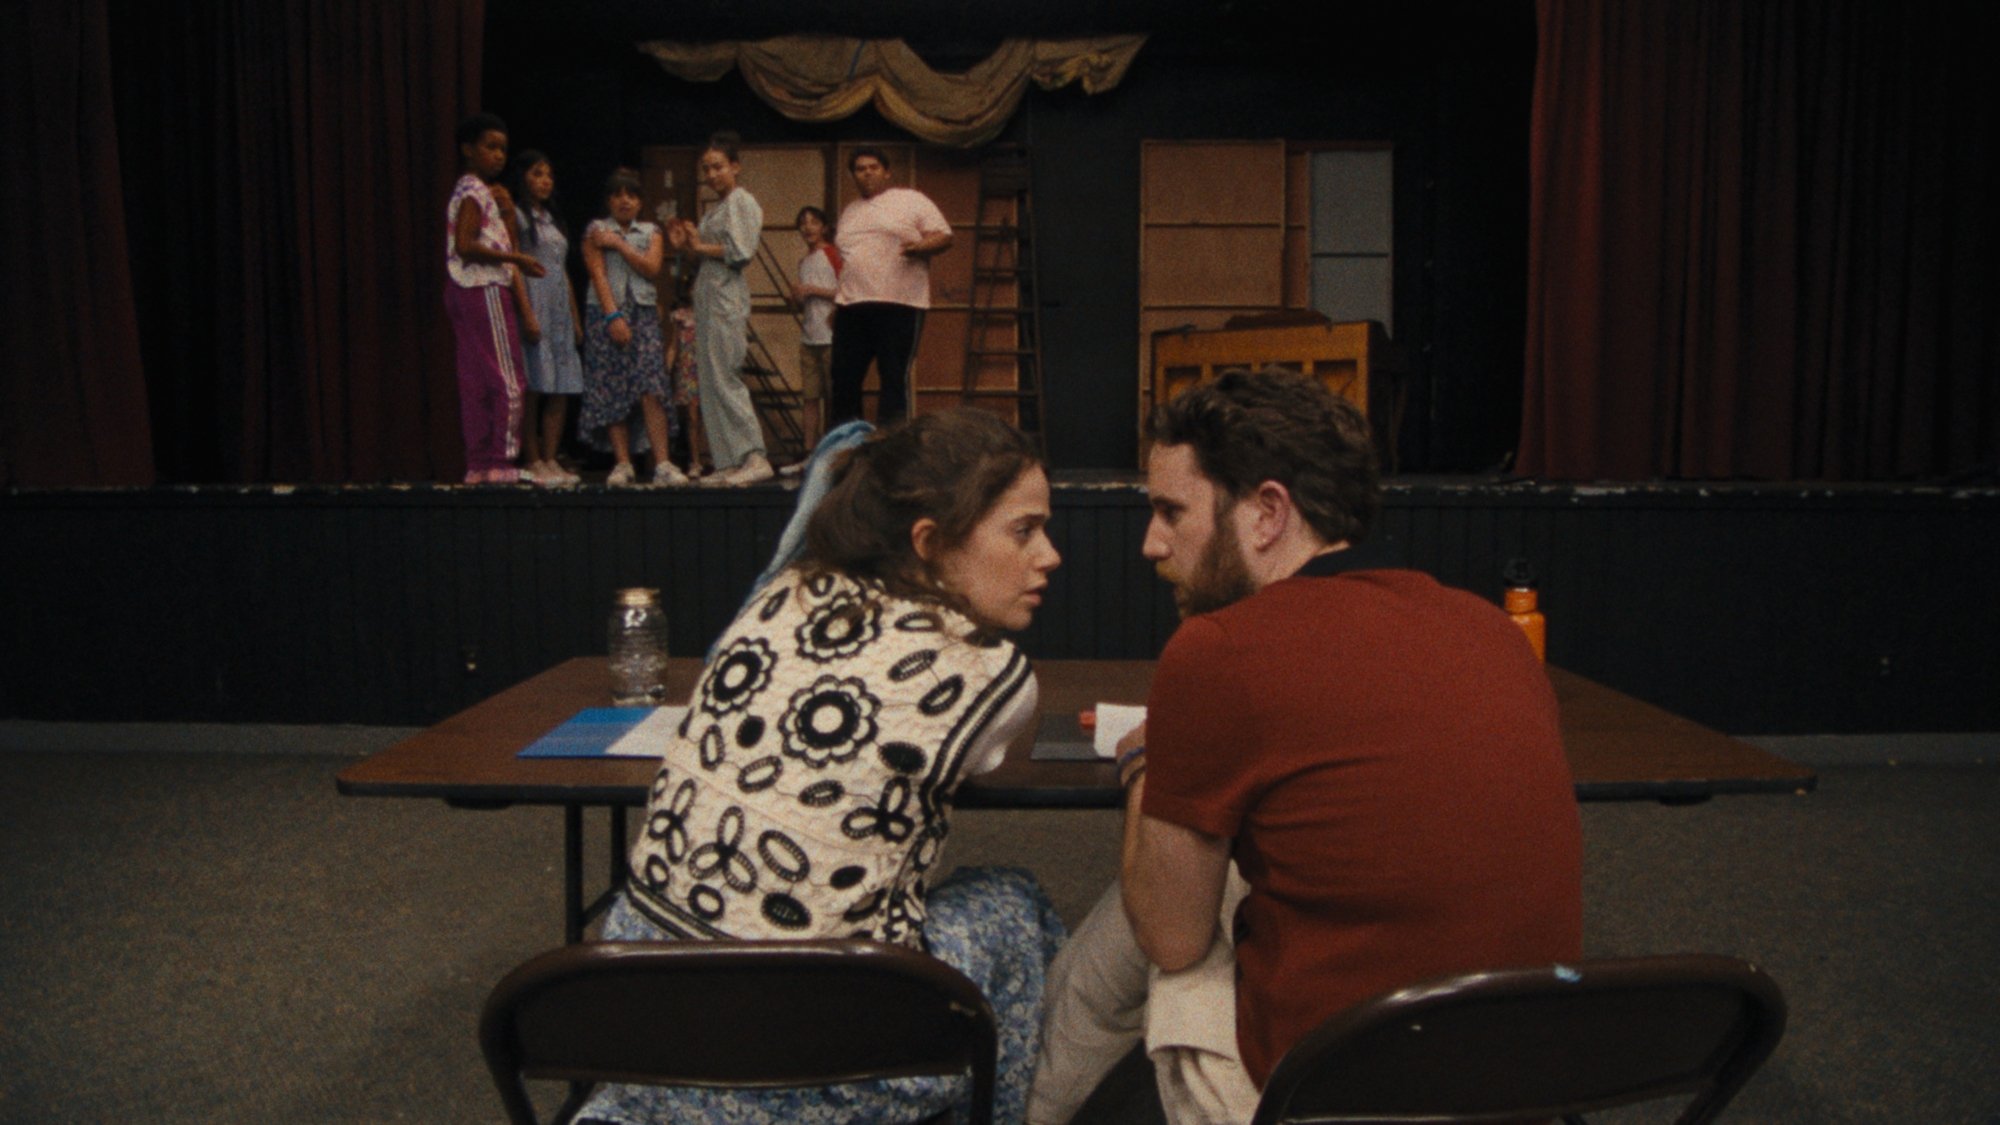 'Theater Camp' Molly Gordon as Rebecca-Diane and Ben Platt as Amos whispering to each other, sitting at a table in front of a stage full of kids.